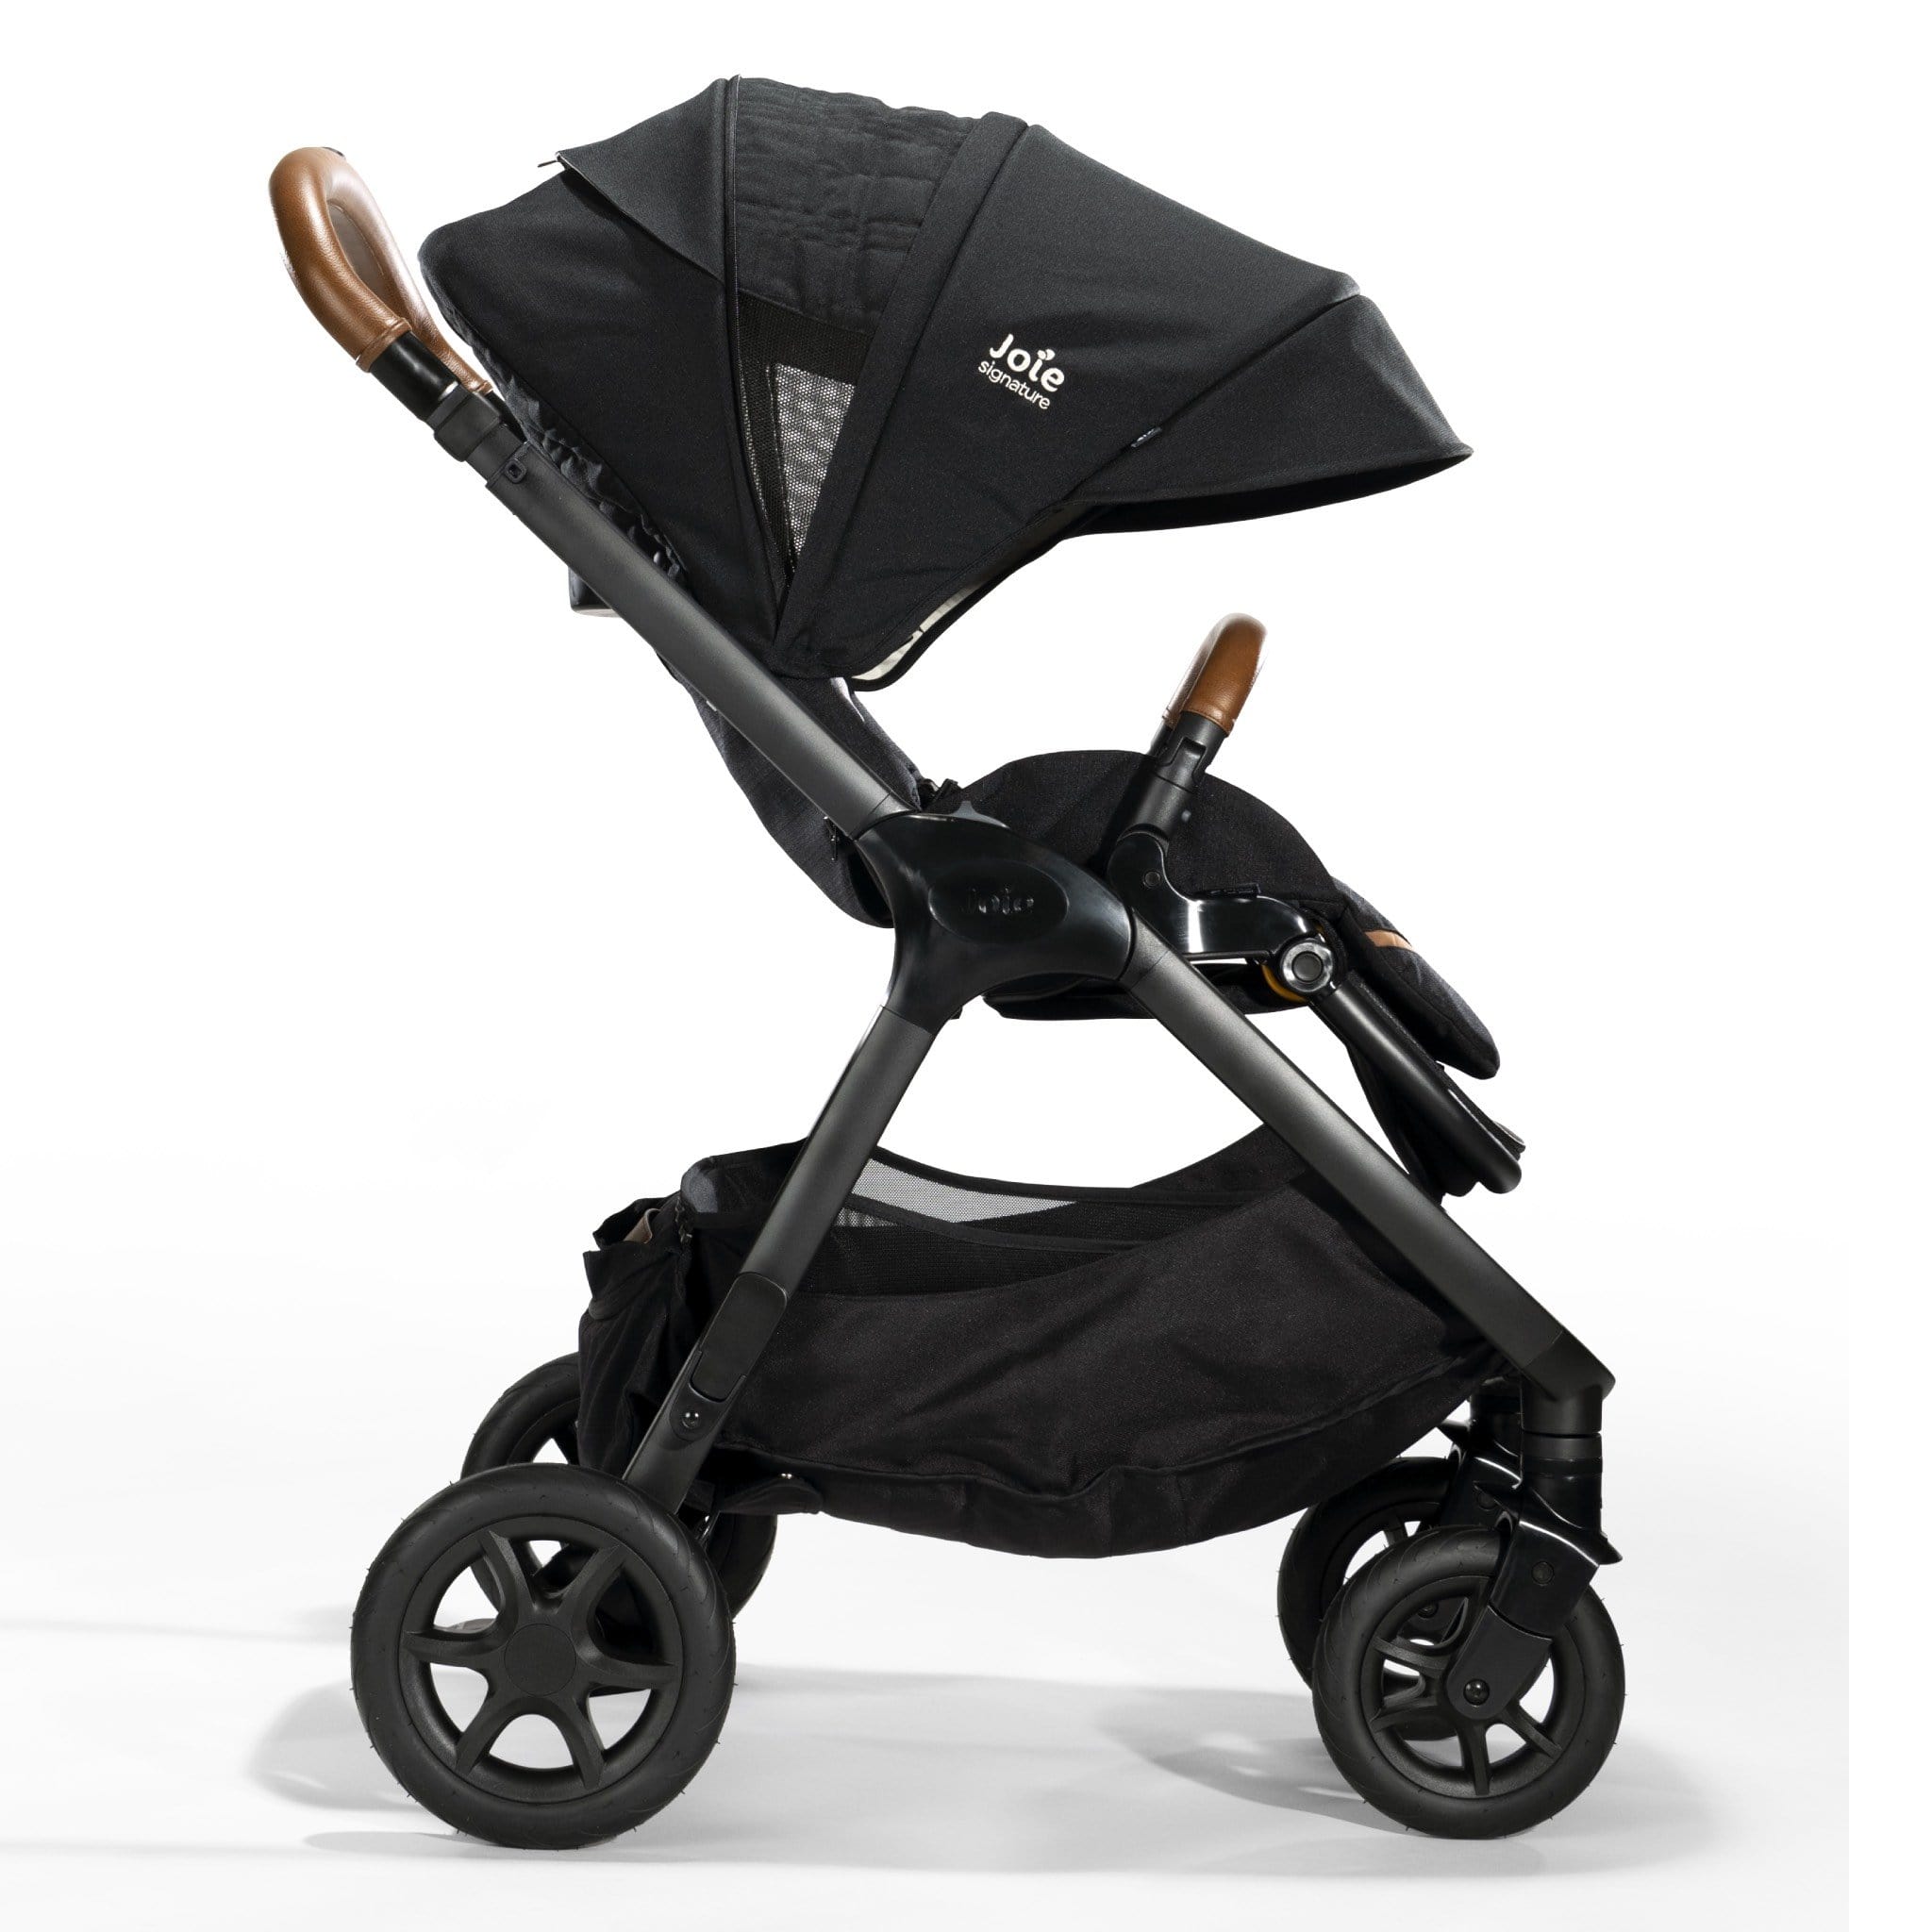 Joie baby prams Joie Finiti 4in1 Signature Edition Pram Eclipse S1606AAECL000